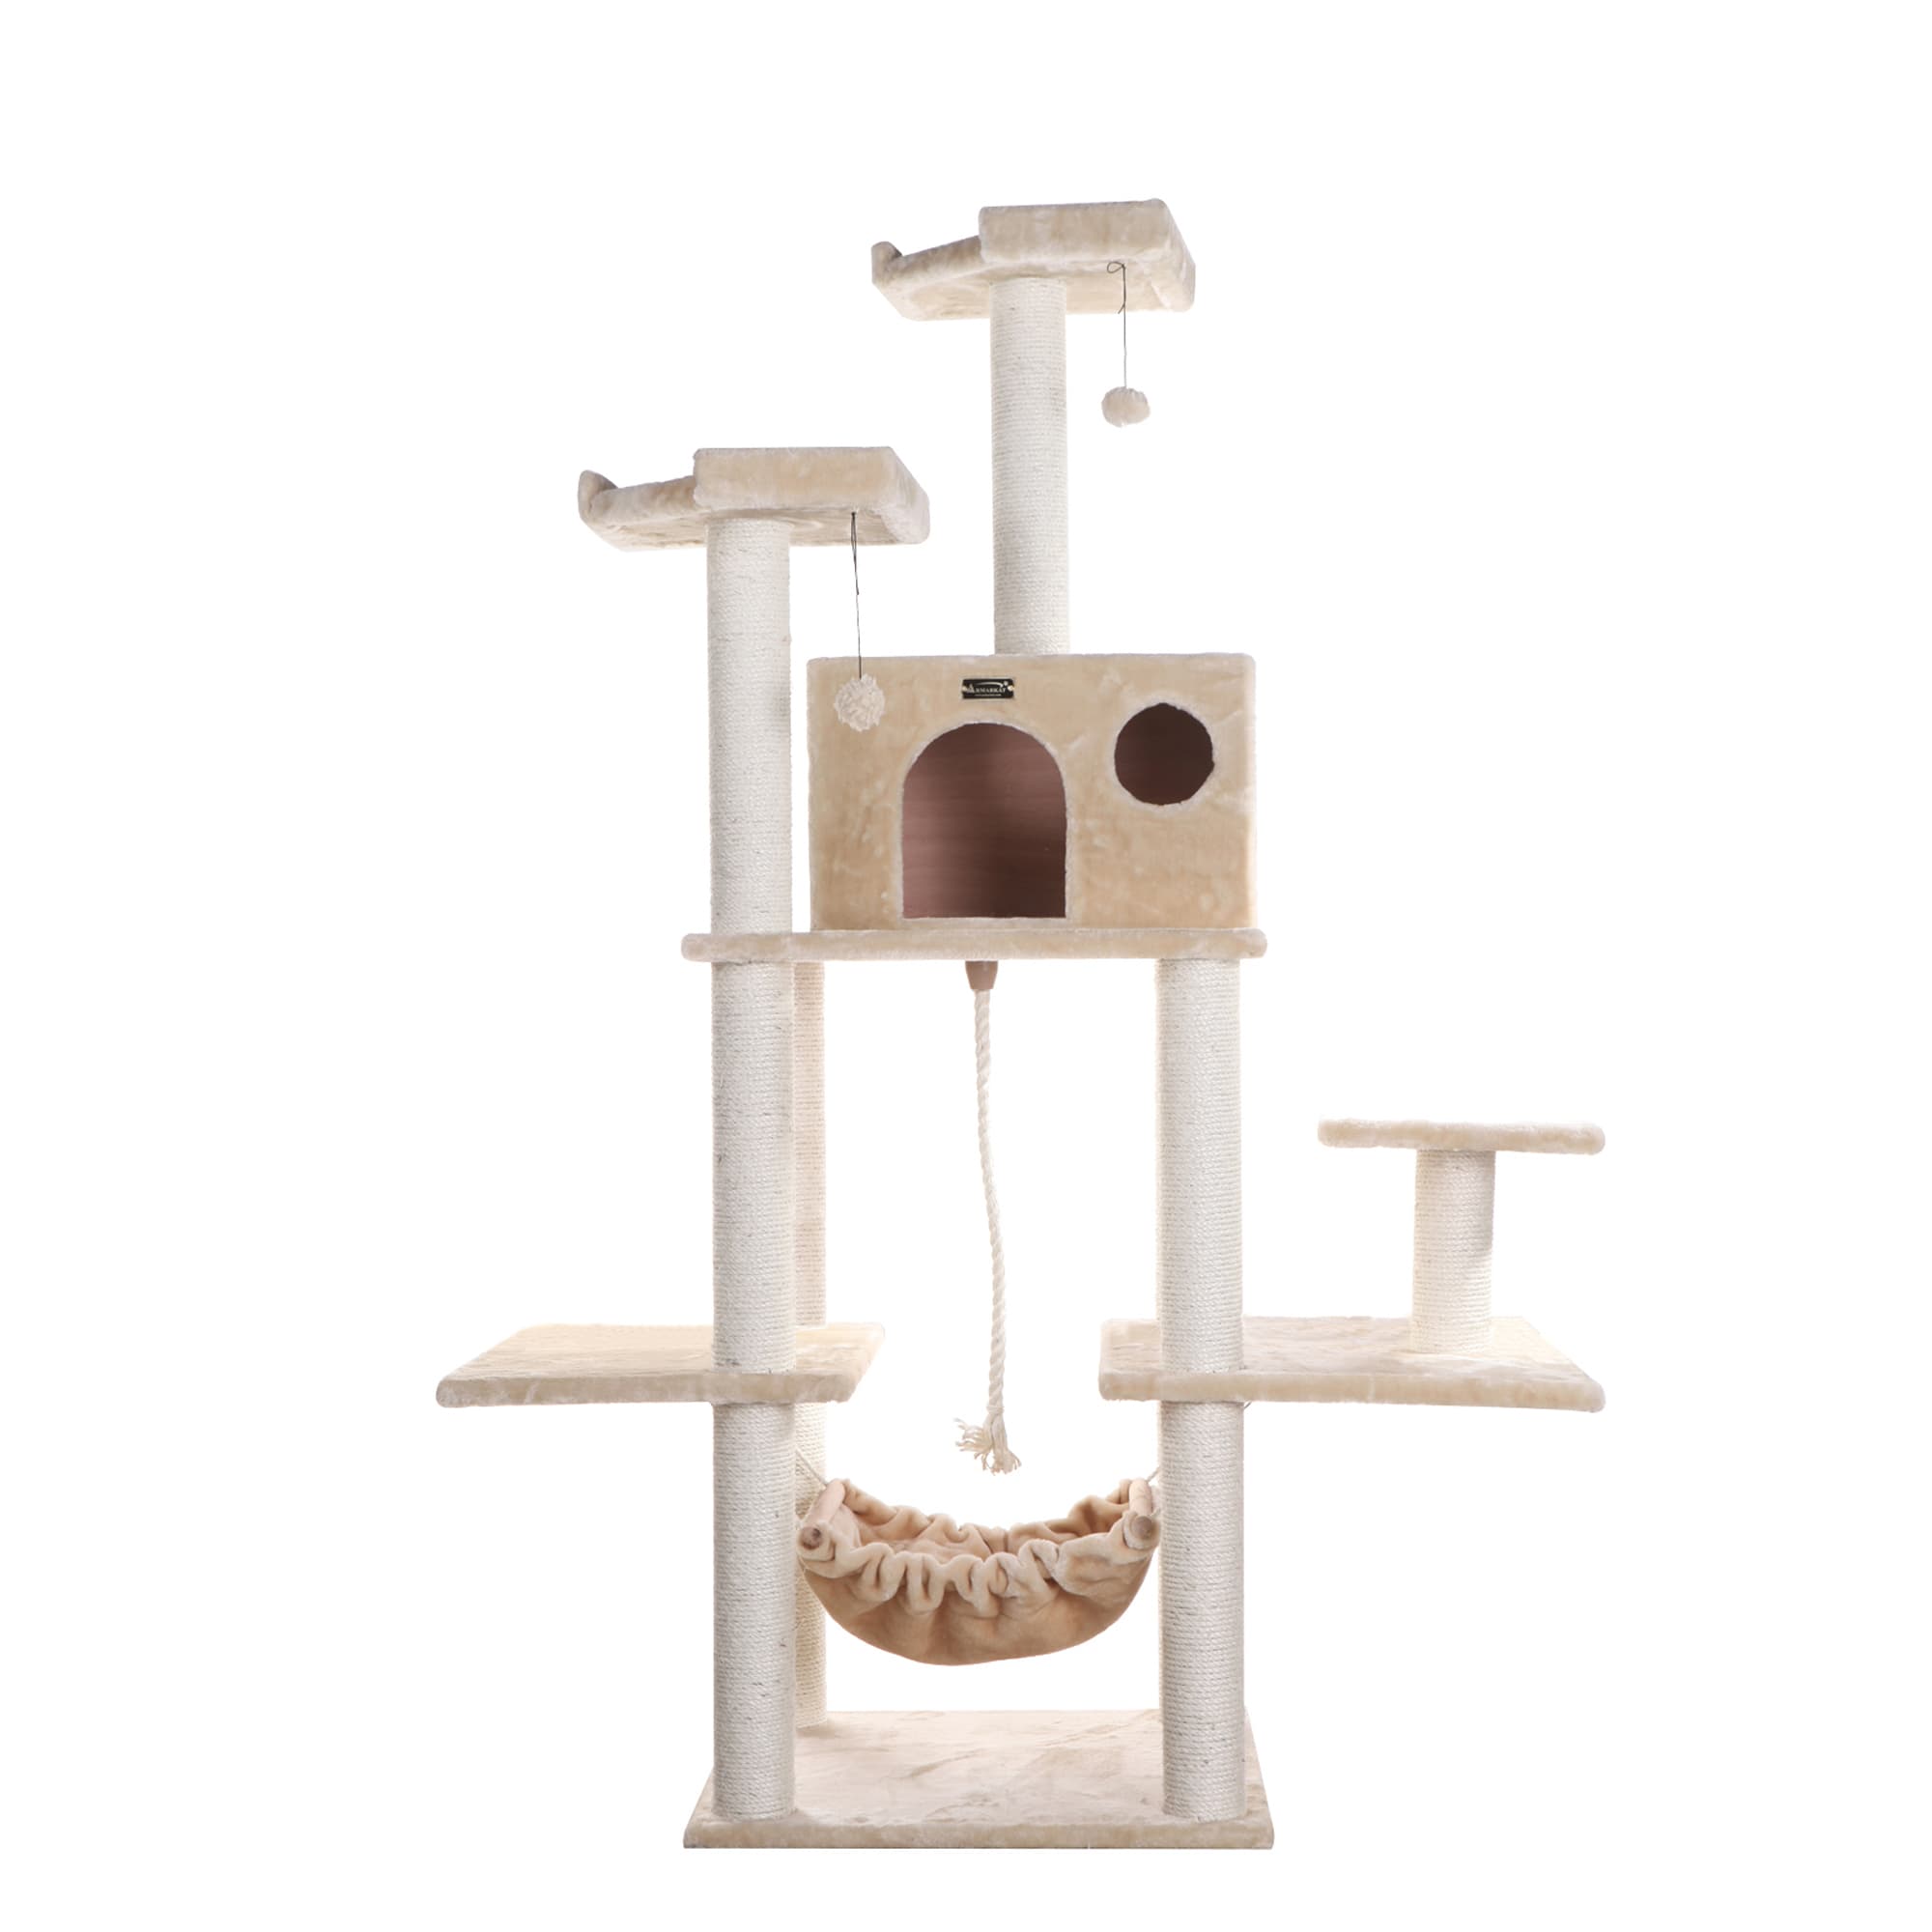 Photos - Other for Cats Armarkat Classic Model A7202 Real Wood Cat Tree, 72" H, 53 IN, Cr 